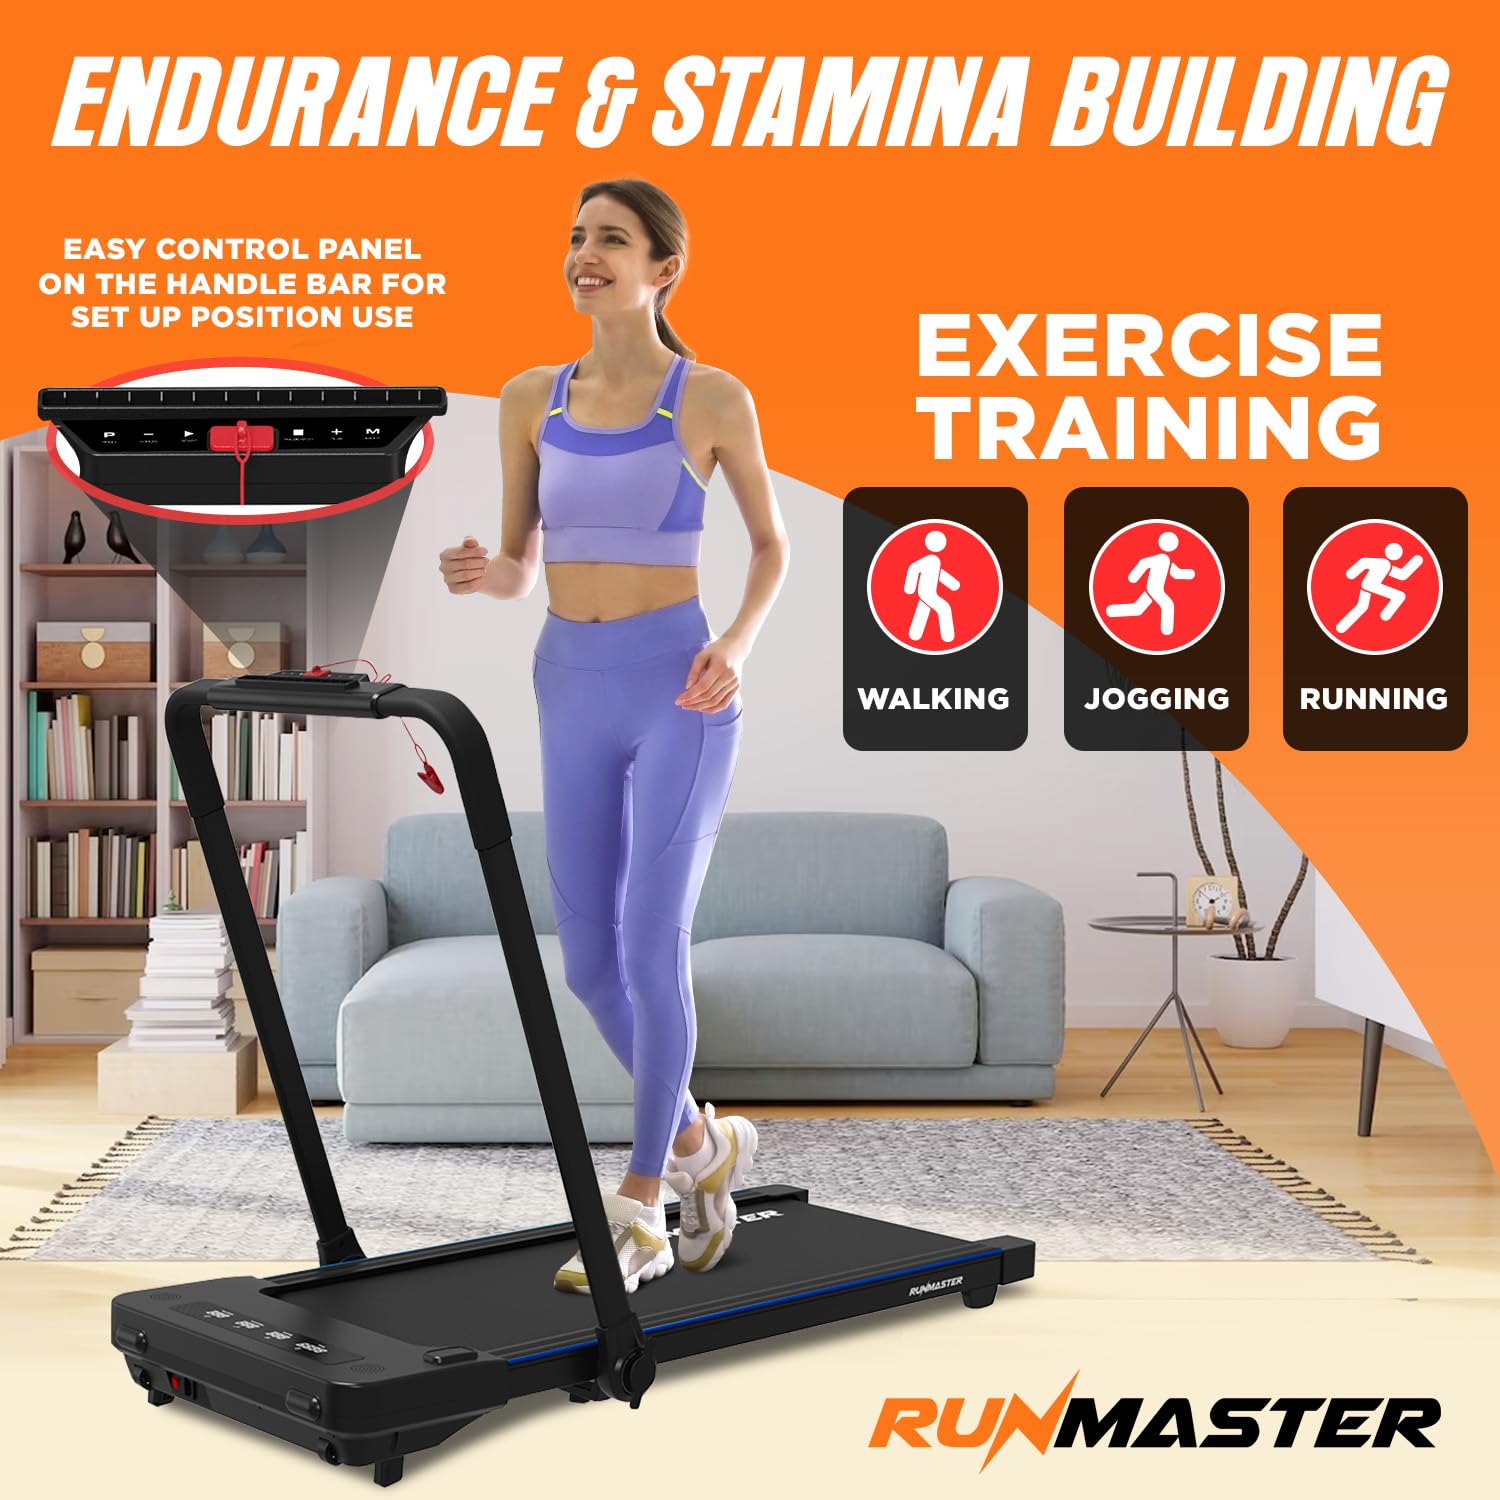 RunMaster 2 in 1 Folding Treadmill, 2.5HP Under Desk Electric Treadmill for Home, Office, Easy Installation, Remote Control, Walking Pad, Large Belt for Walking, Jogging, 12 Exercise Programs